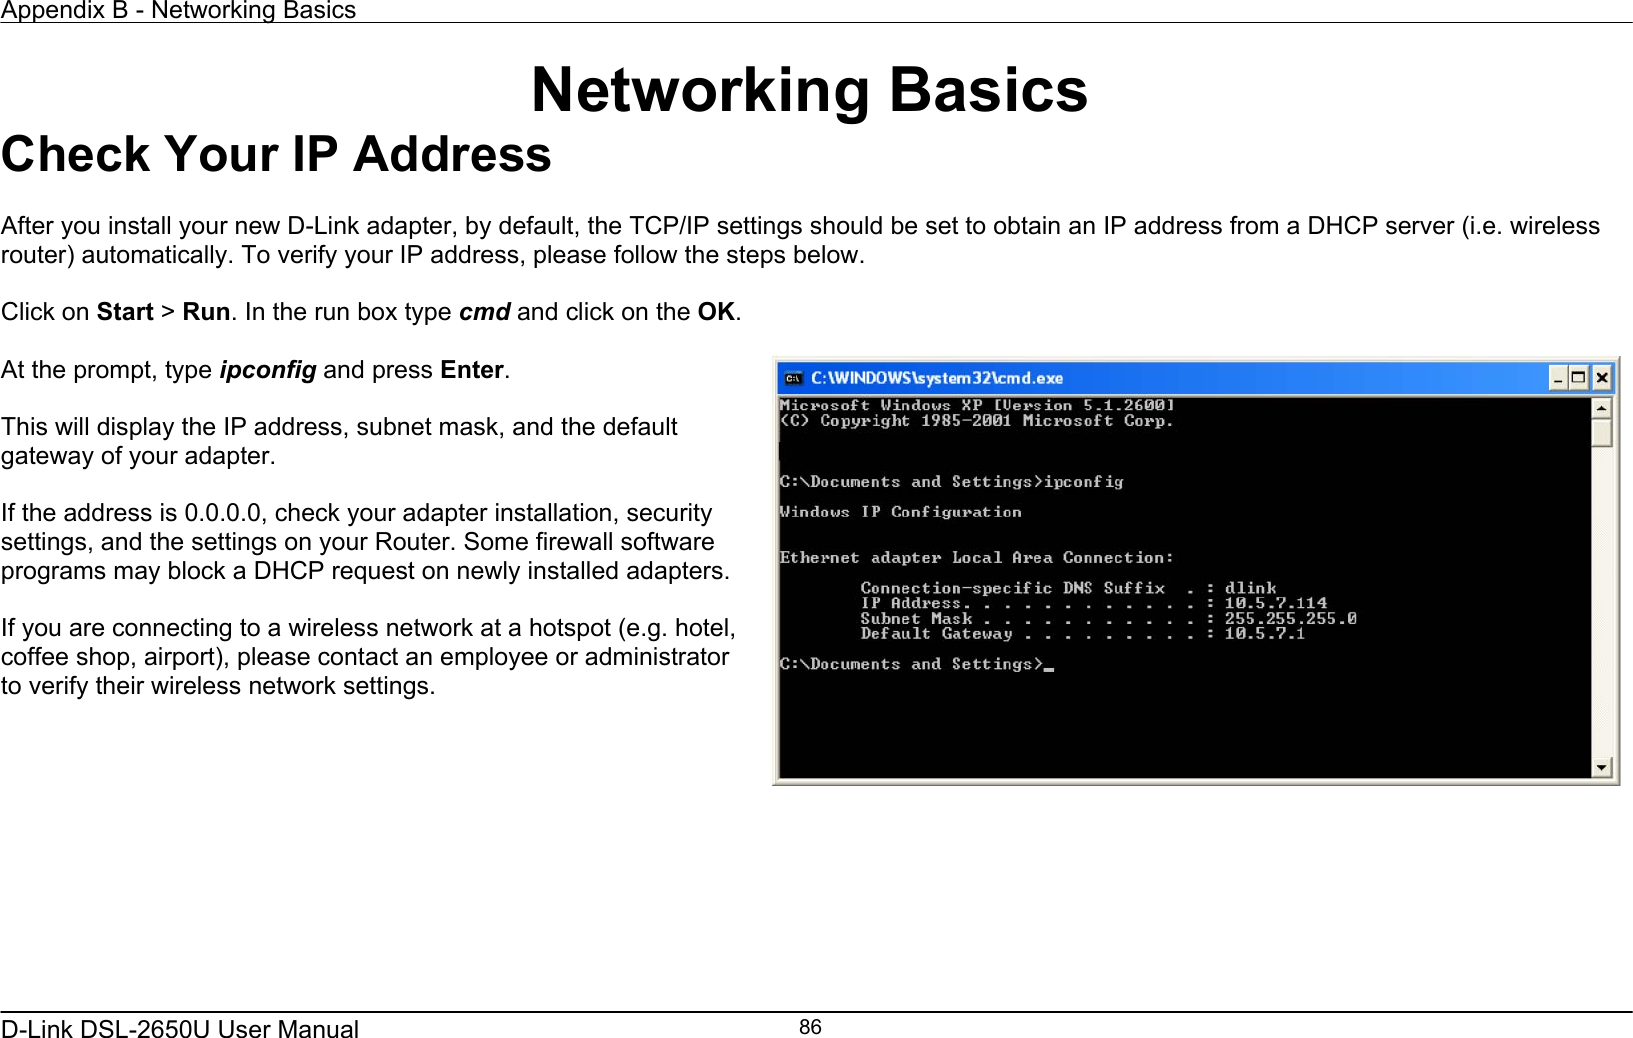 Appendix B - Networking Basics   D-Link DSL-2650U User Manual    86Networking Basics Check Your IP Address  After you install your new D-Link adapter, by default, the TCP/IP settings should be set to obtain an IP address from a DHCP server (i.e. wireless router) automatically. To verify your IP address, please follow the steps below.  Click on Start &gt; Run. In the run box type cmd and click on the OK.  At the prompt, type ipconfig and press Enter.  This will display the IP address, subnet mask, and the default gateway of your adapter.  If the address is 0.0.0.0, check your adapter installation, security settings, and the settings on your Router. Some firewall software programs may block a DHCP request on newly installed adapters.  If you are connecting to a wireless network at a hotspot (e.g. hotel, coffee shop, airport), please contact an employee or administrator to verify their wireless network settings.    